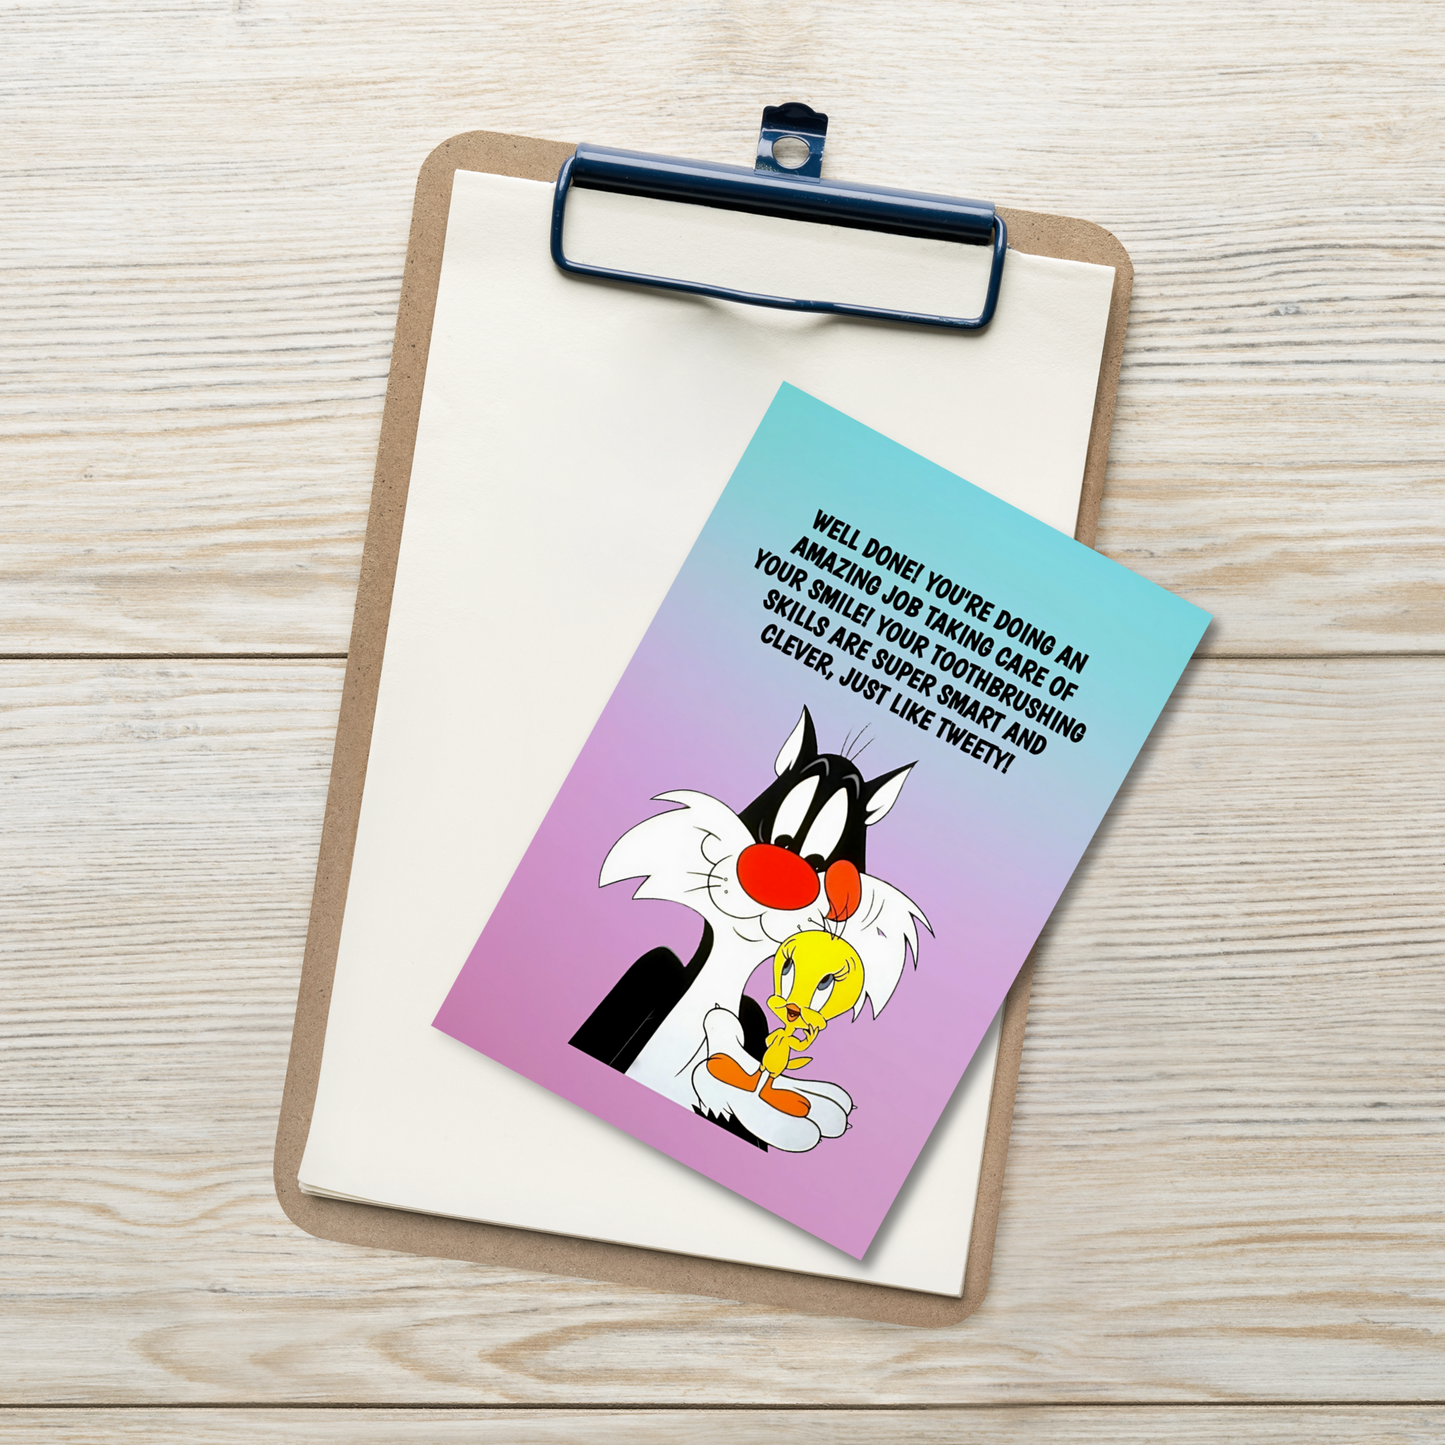 Sylvester And Tweety  | Dental Motivational & Reward Cards- Well Done For Keeping Your Teeth Healthy, Strong And Bright!